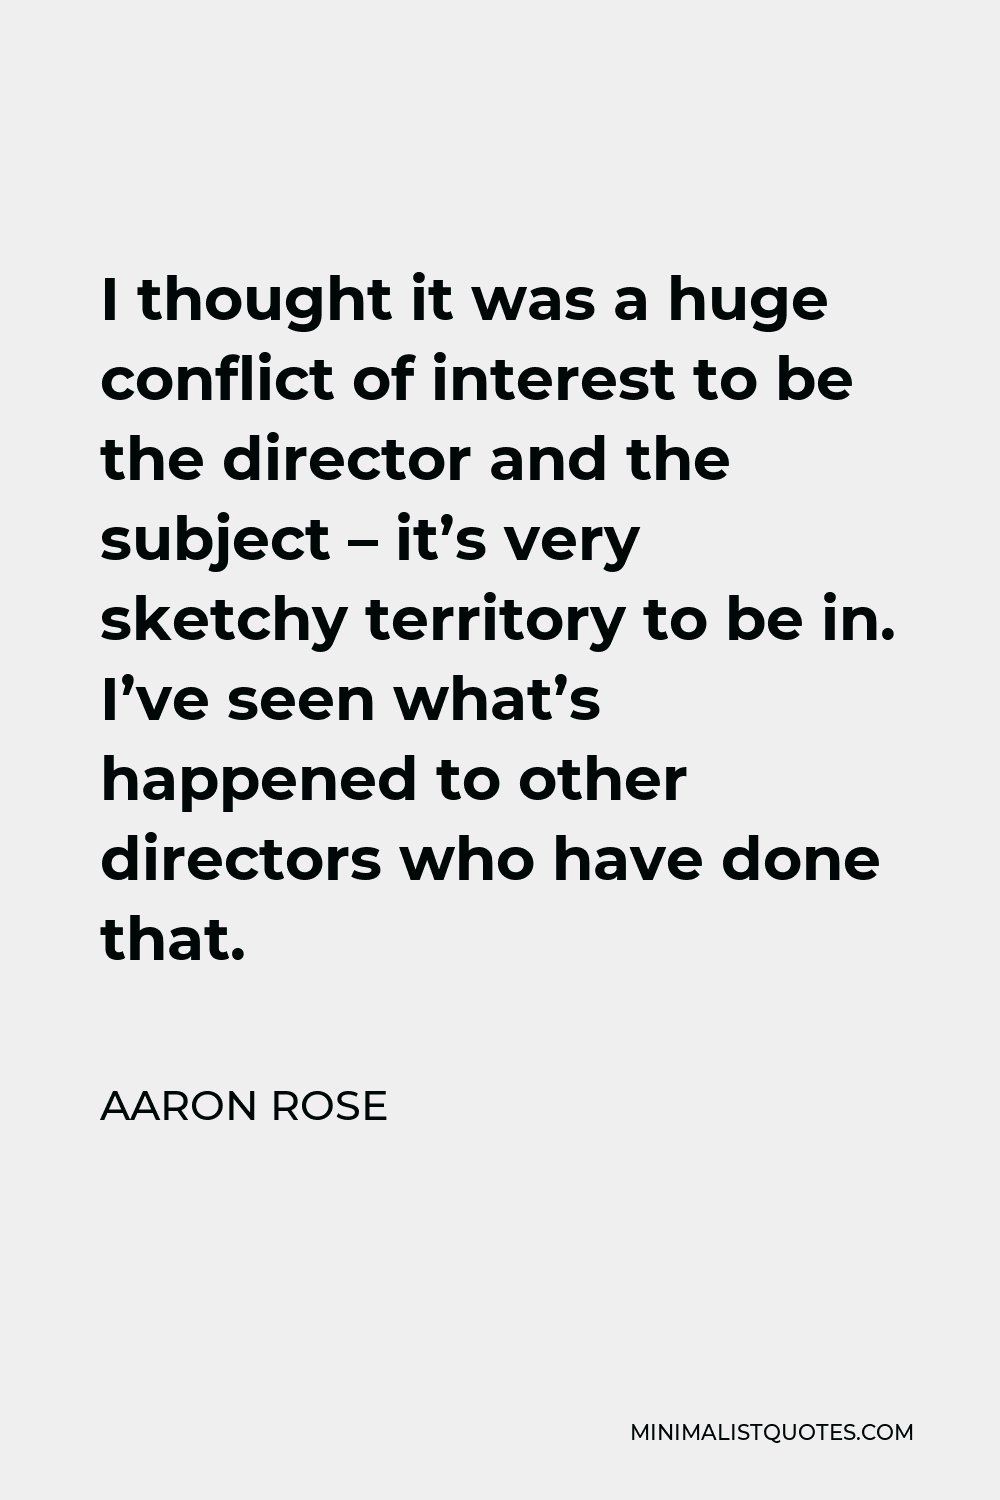 Aaron Rose Quote - I thought it was a huge conflict of interest to be the director and the subject – it’s very sketchy territory to be in. I’ve seen what’s happened to other directors who have done that.